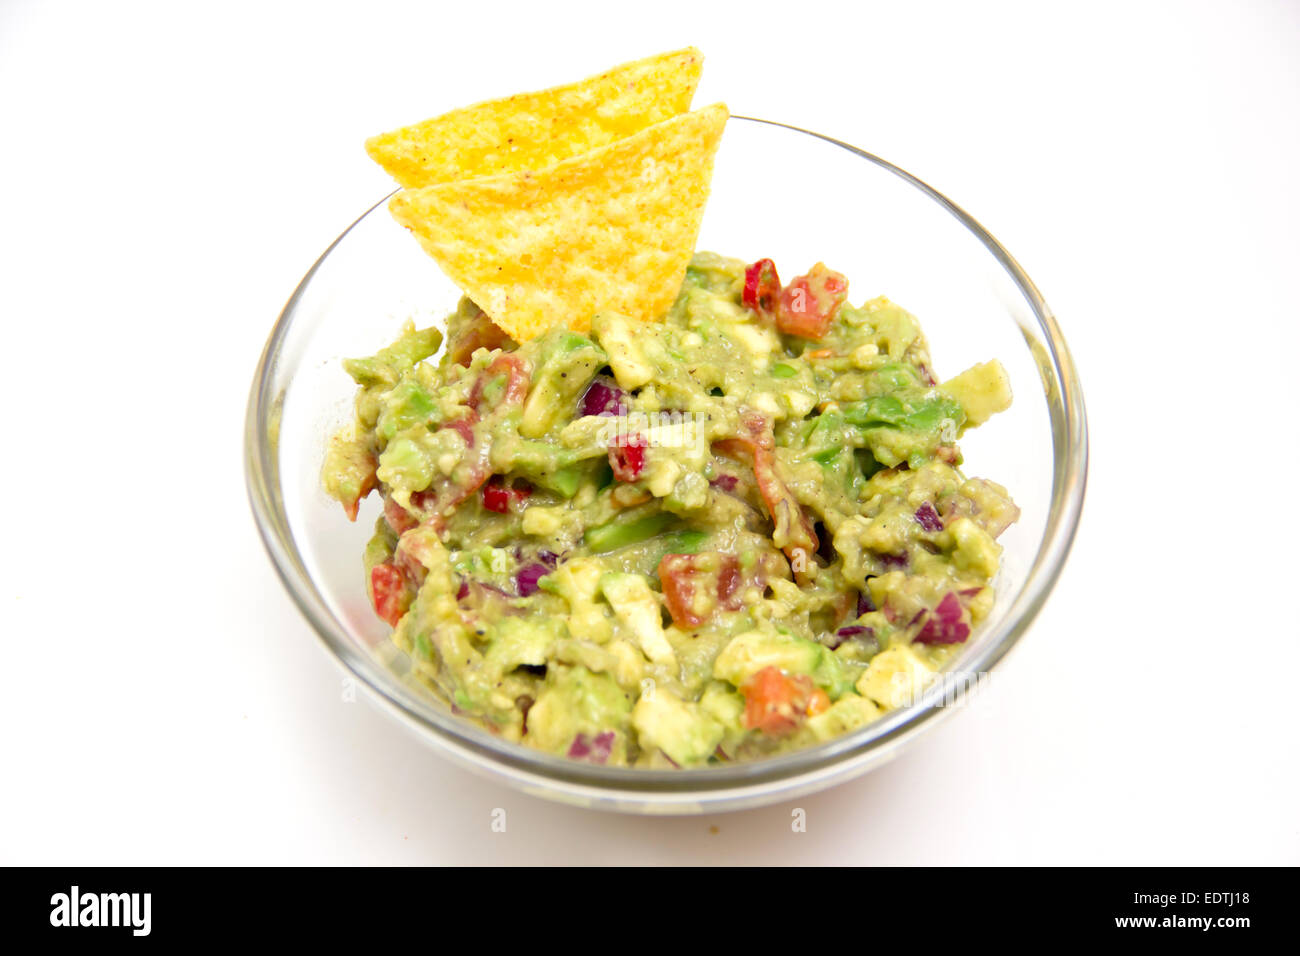 Guacamole in glass bowl on white background Stock Photo